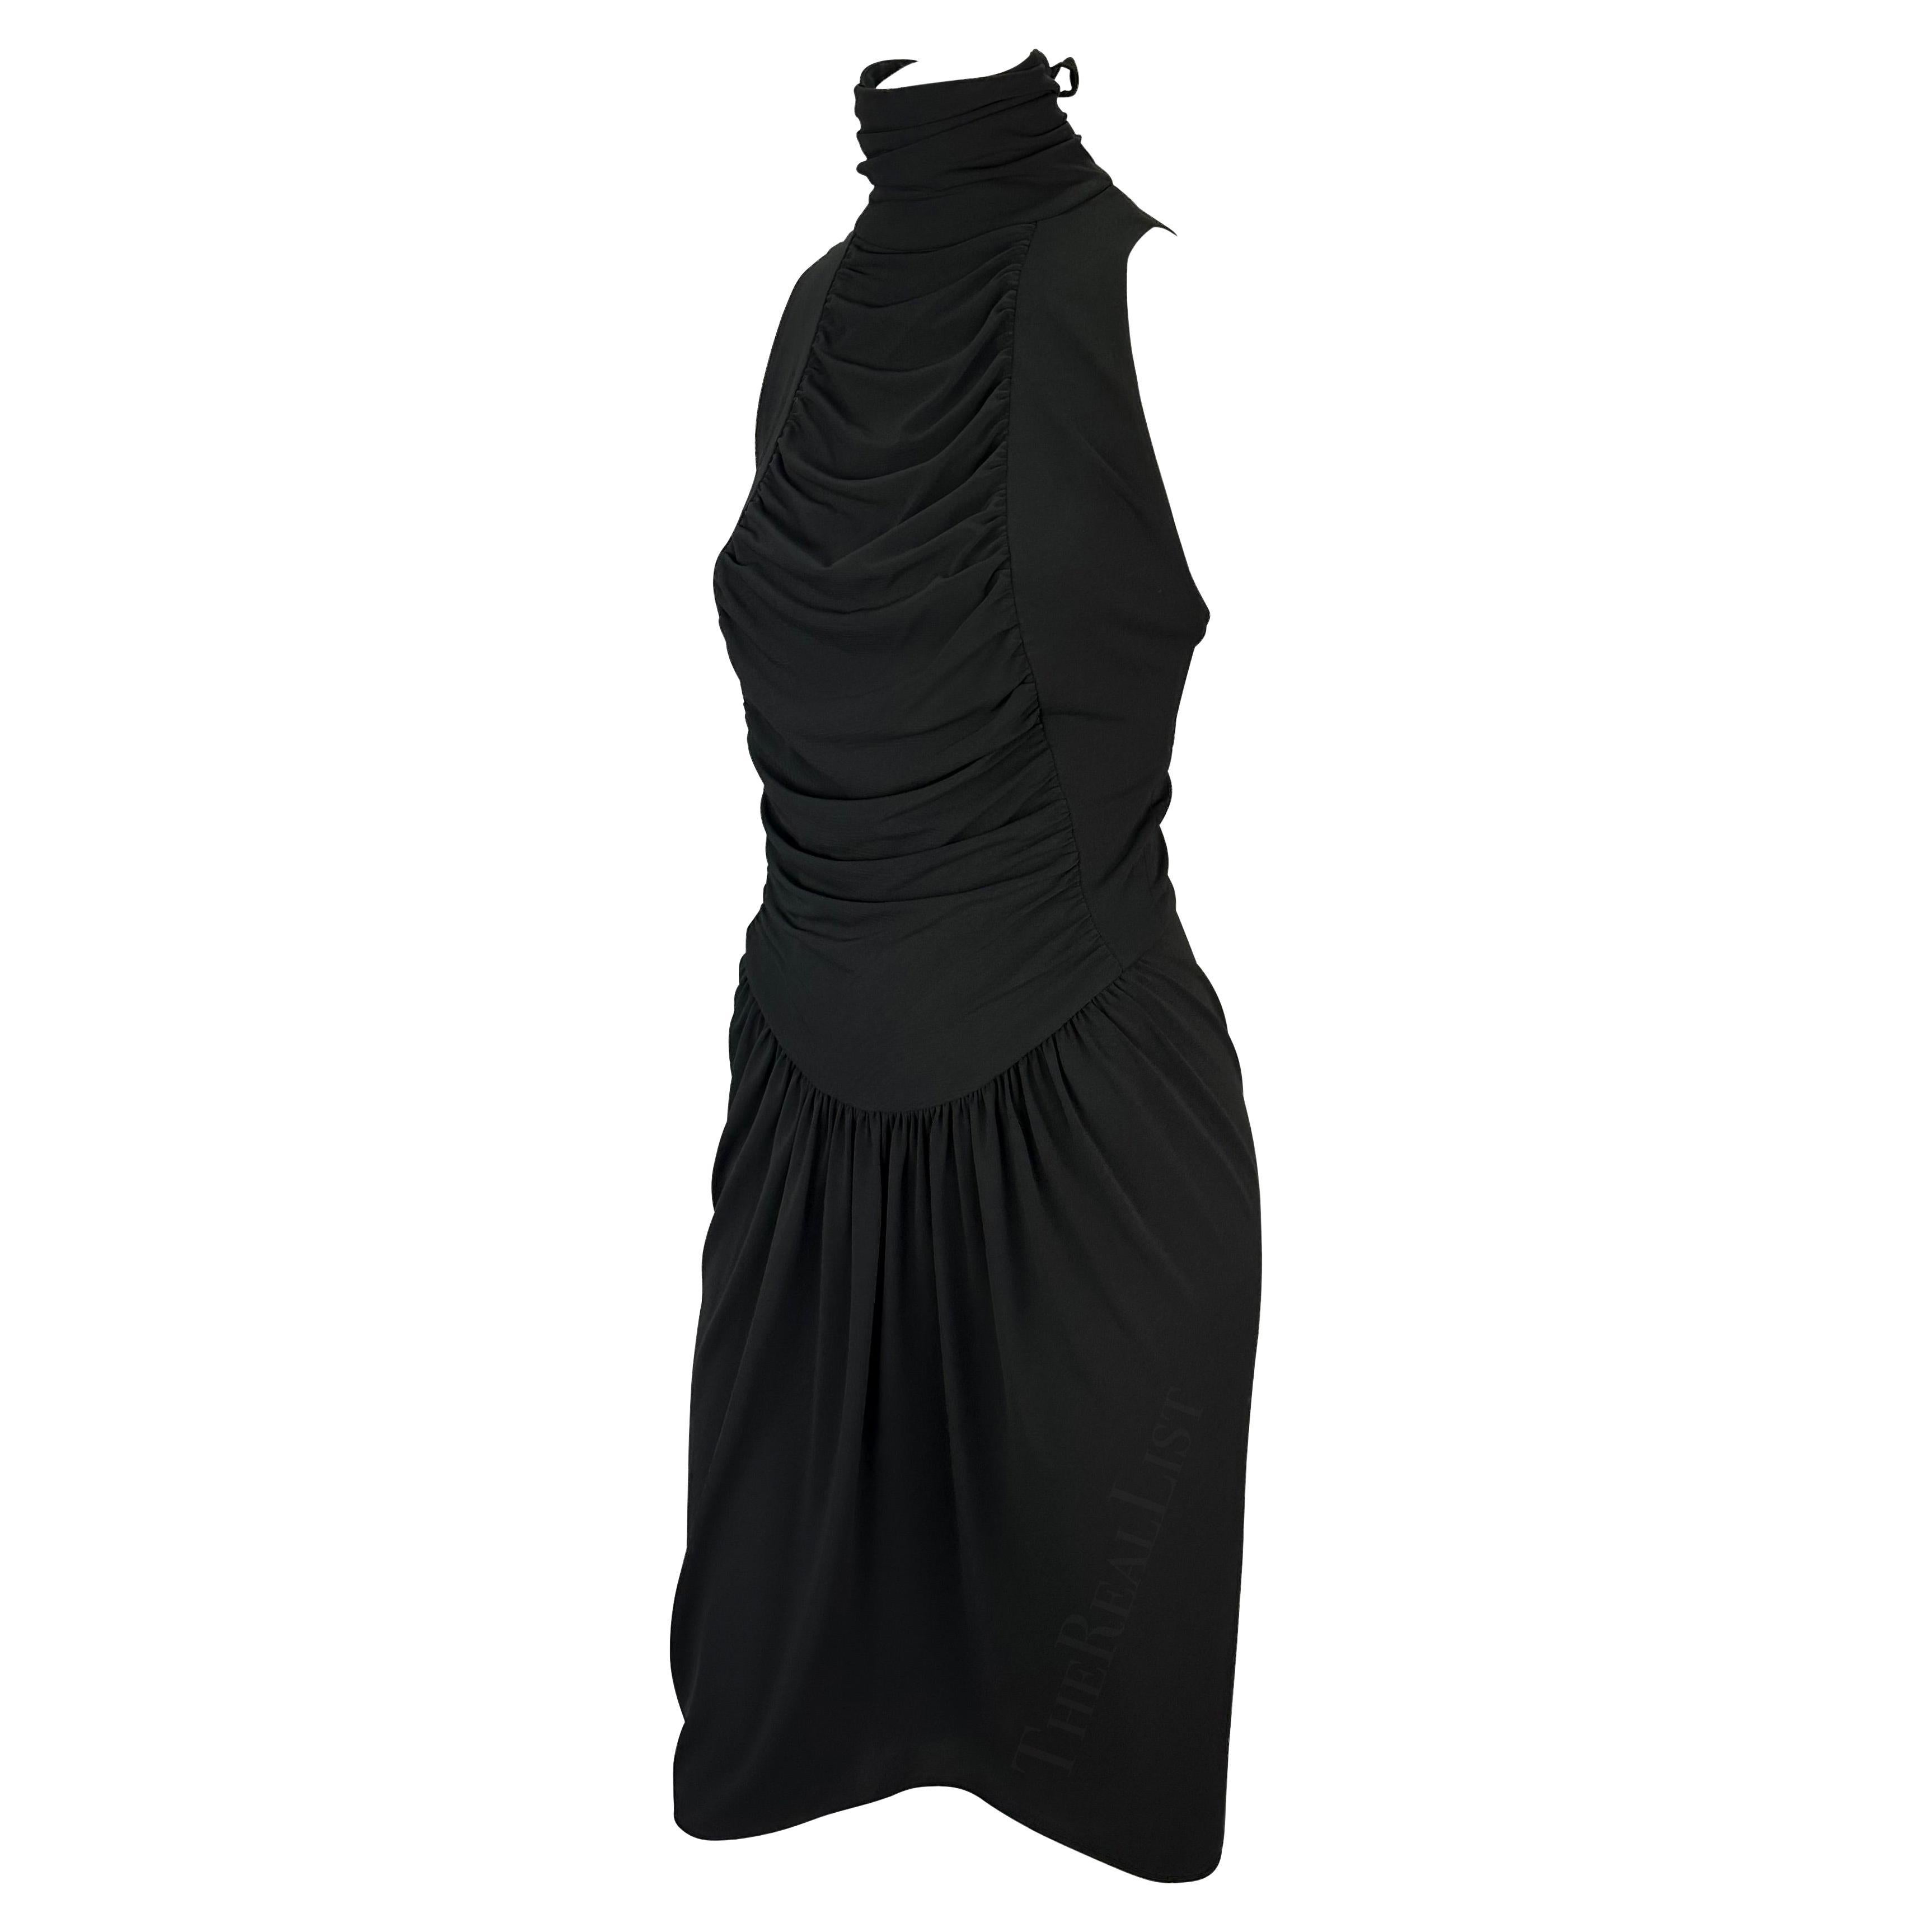 S/S 2003 Karl Lagerfeld Gallery Runway Black Backless Ruched Midi Dress For Sale 2